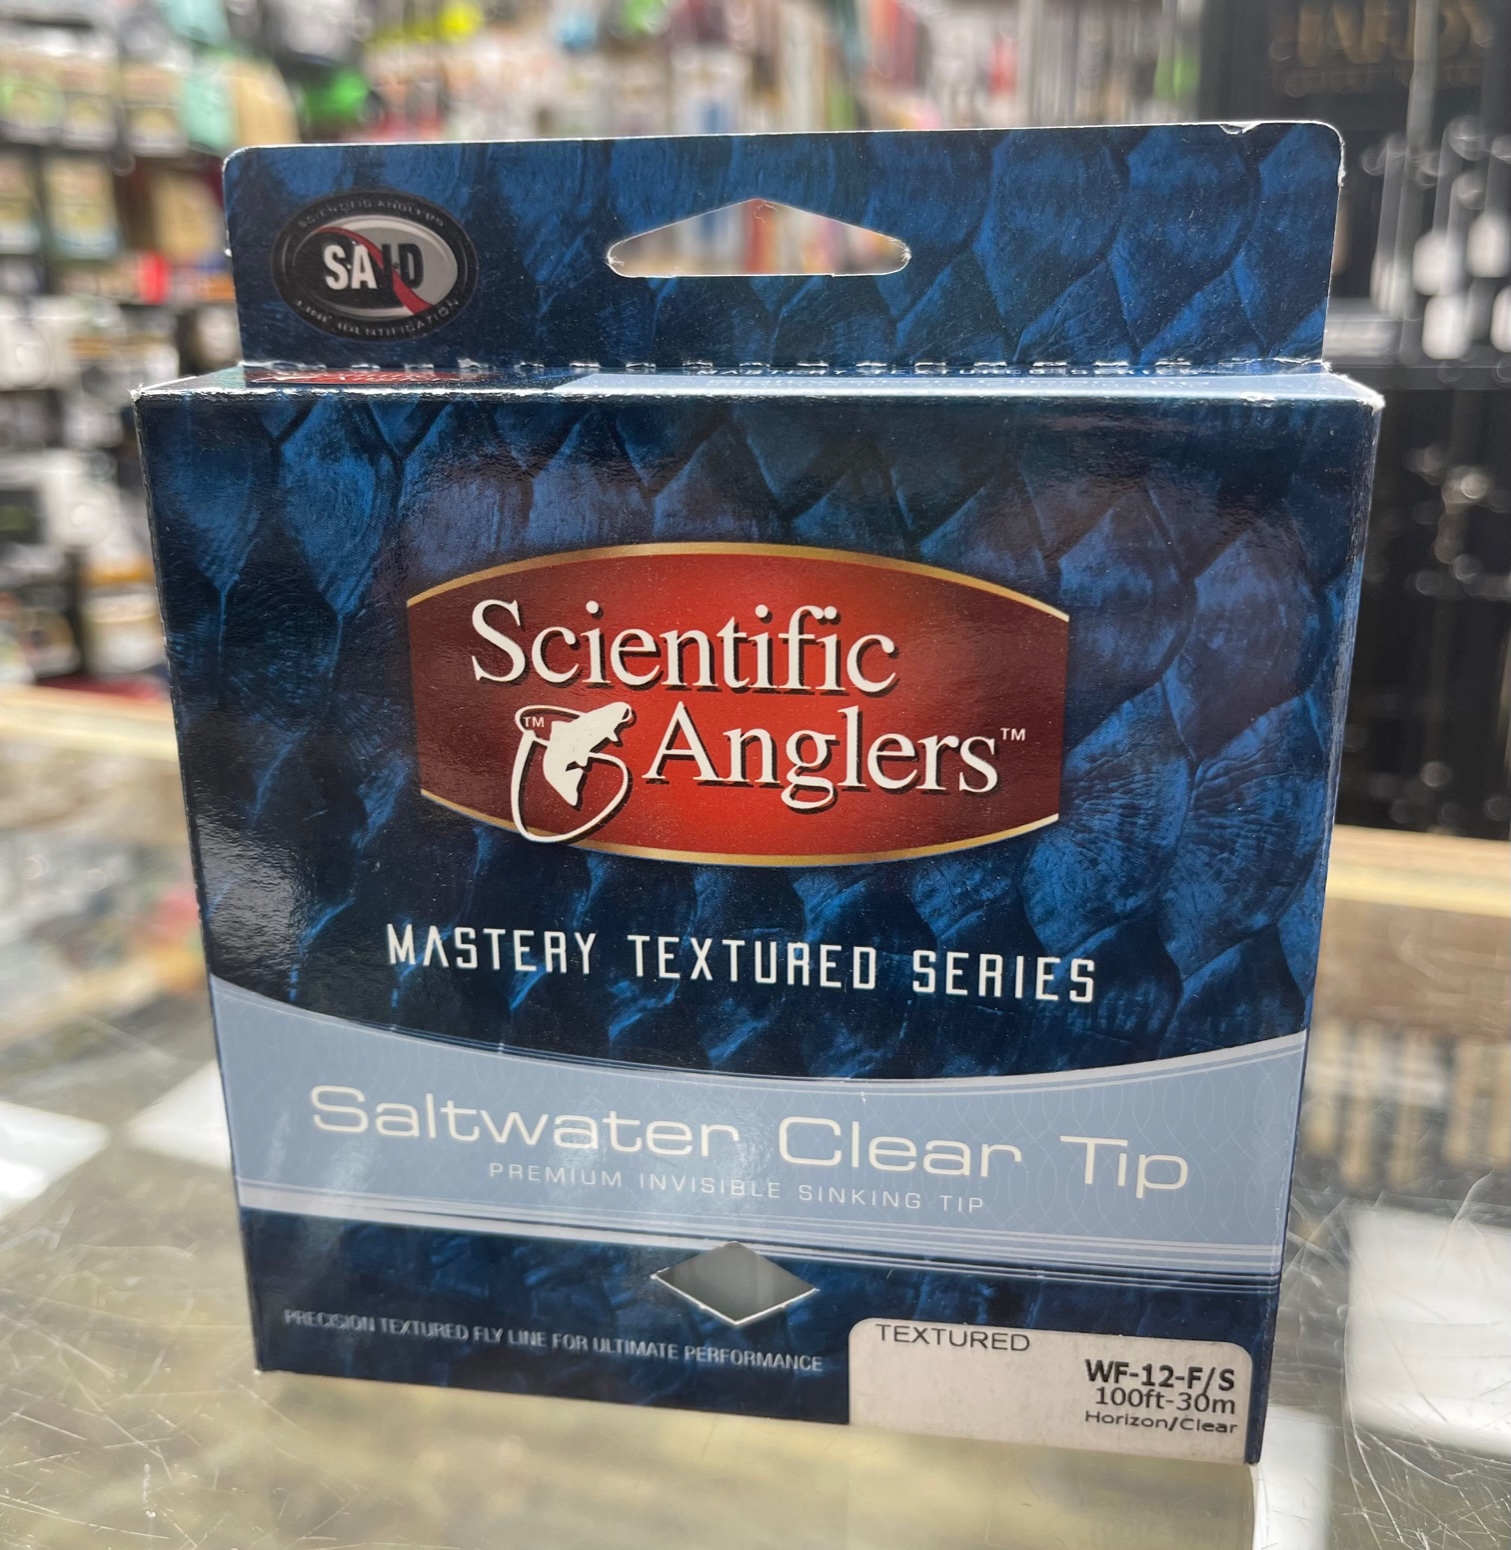 Scientific Anglers Mastery Textured Saltwater Clear Tip - WF12F/I